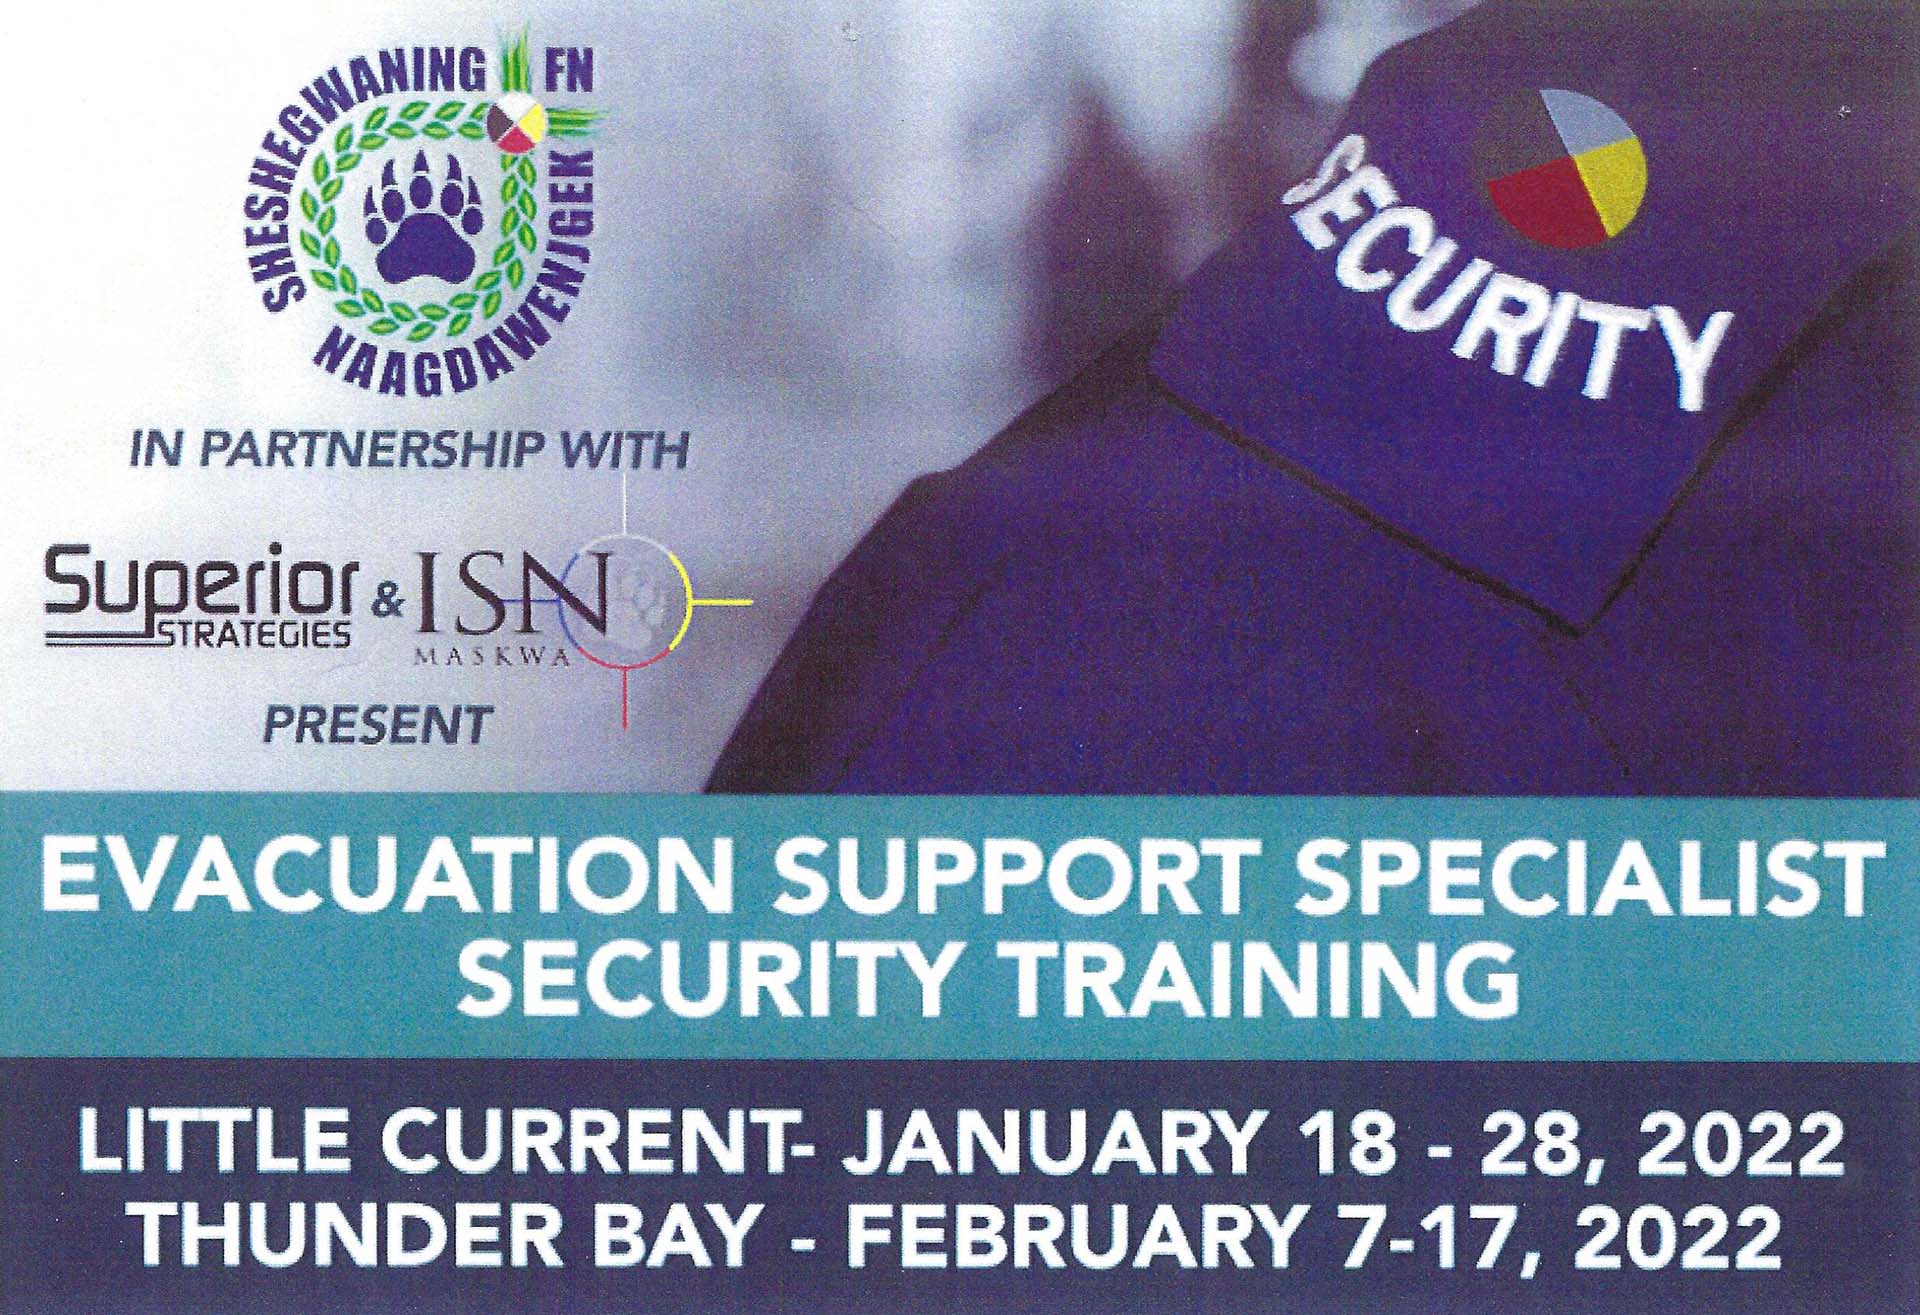 Evacuation Support Specialist Security Training